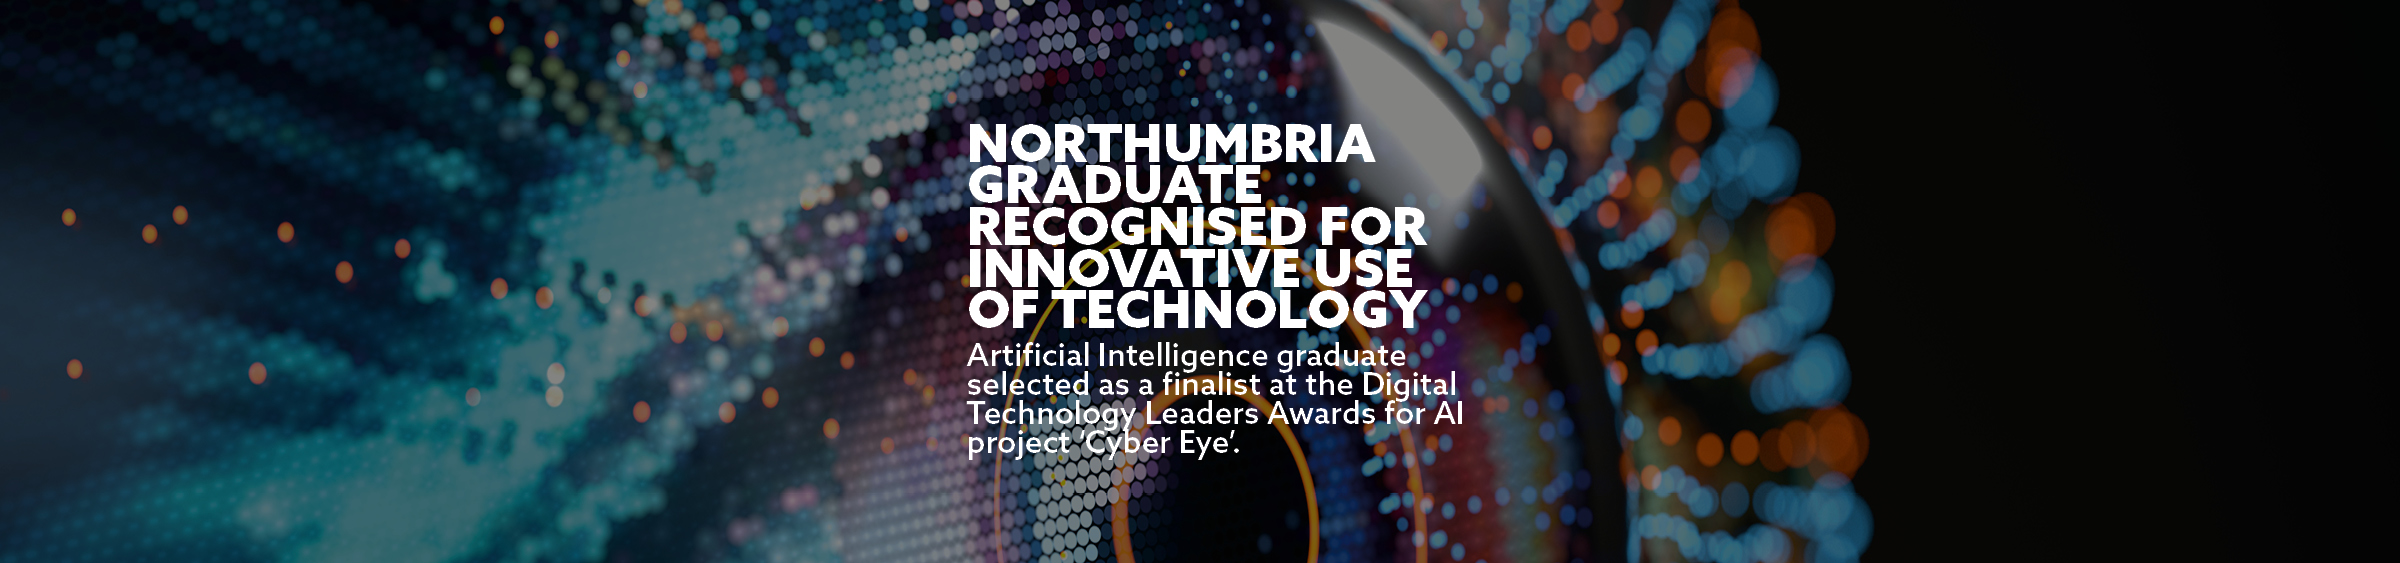 Northumbria graduate recognised for innovative use of technology